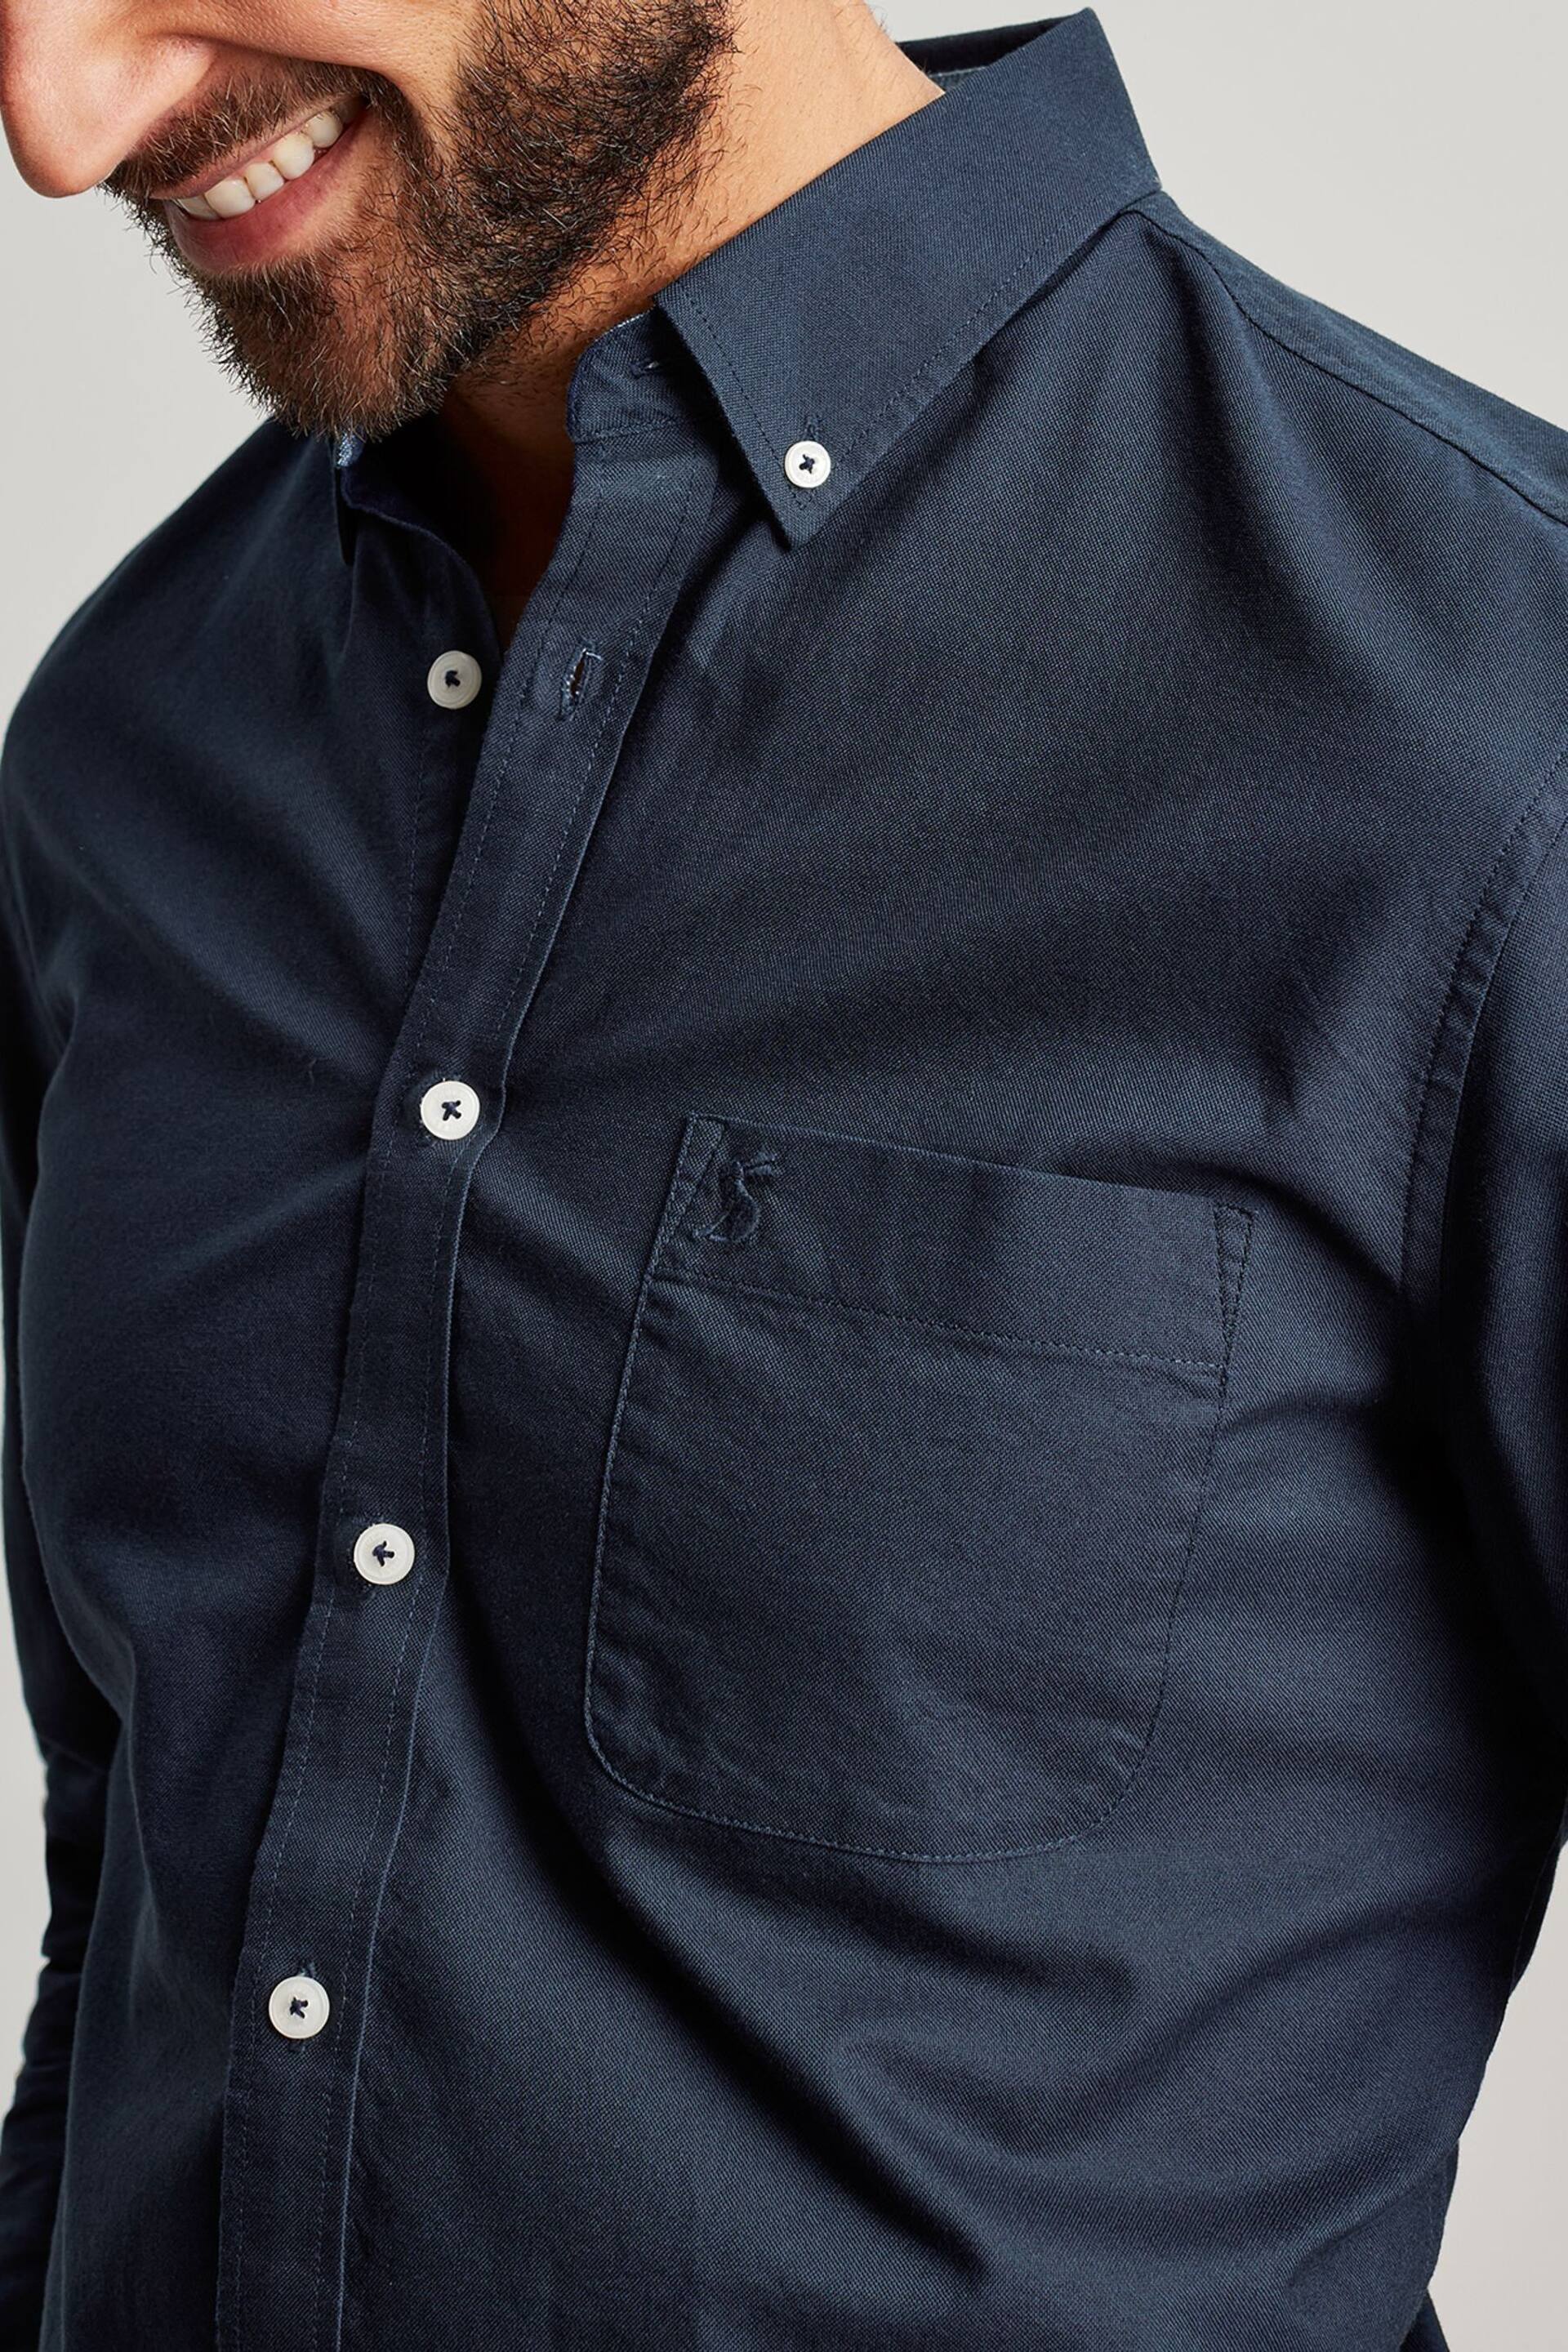 Joules Oxford Navy Blue Long Sleeve Oxford Shirt - Image 2 of 7